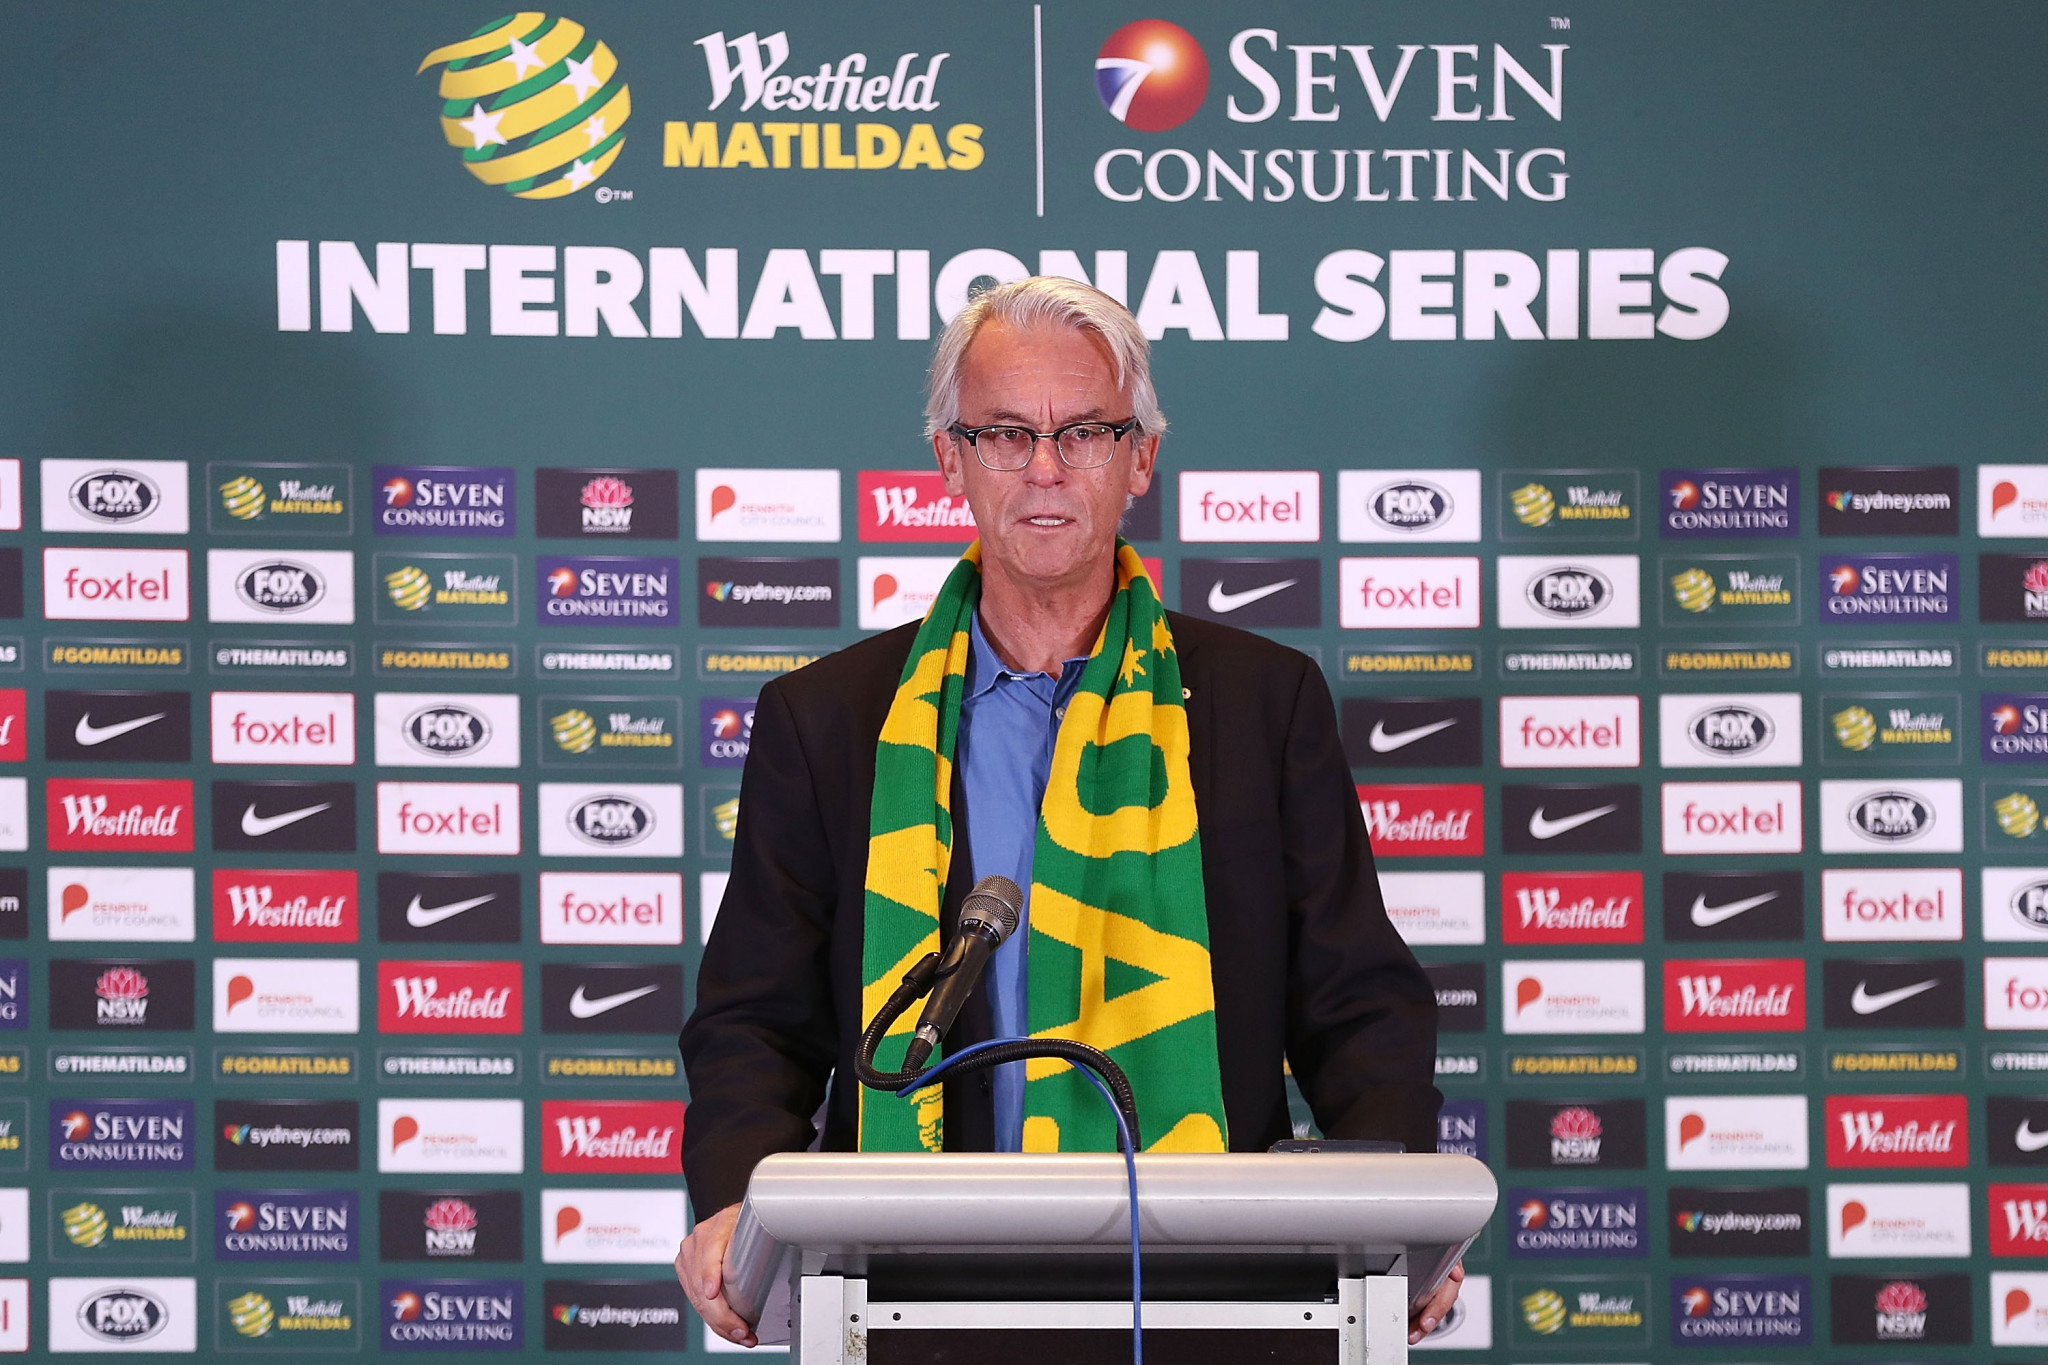 David Gallop, the chief executive of Football Federation Australia, has been named as the new chair of the Coalition of Major Professional and Participation Sports ©Getty Images